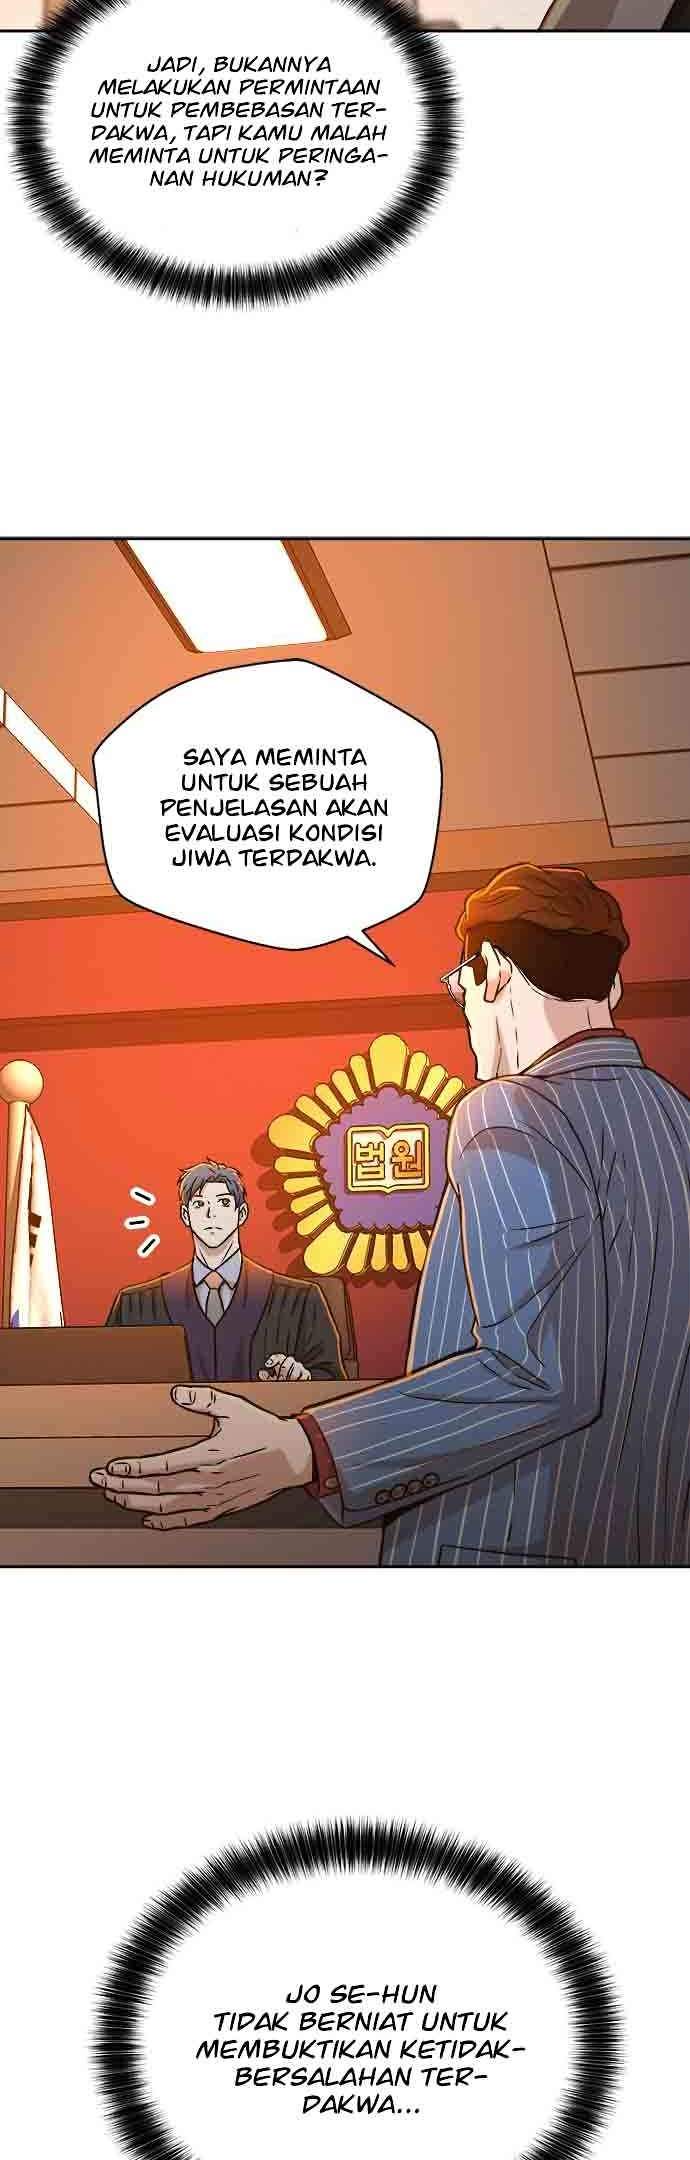 Judge Lee Han Young Chapter 19